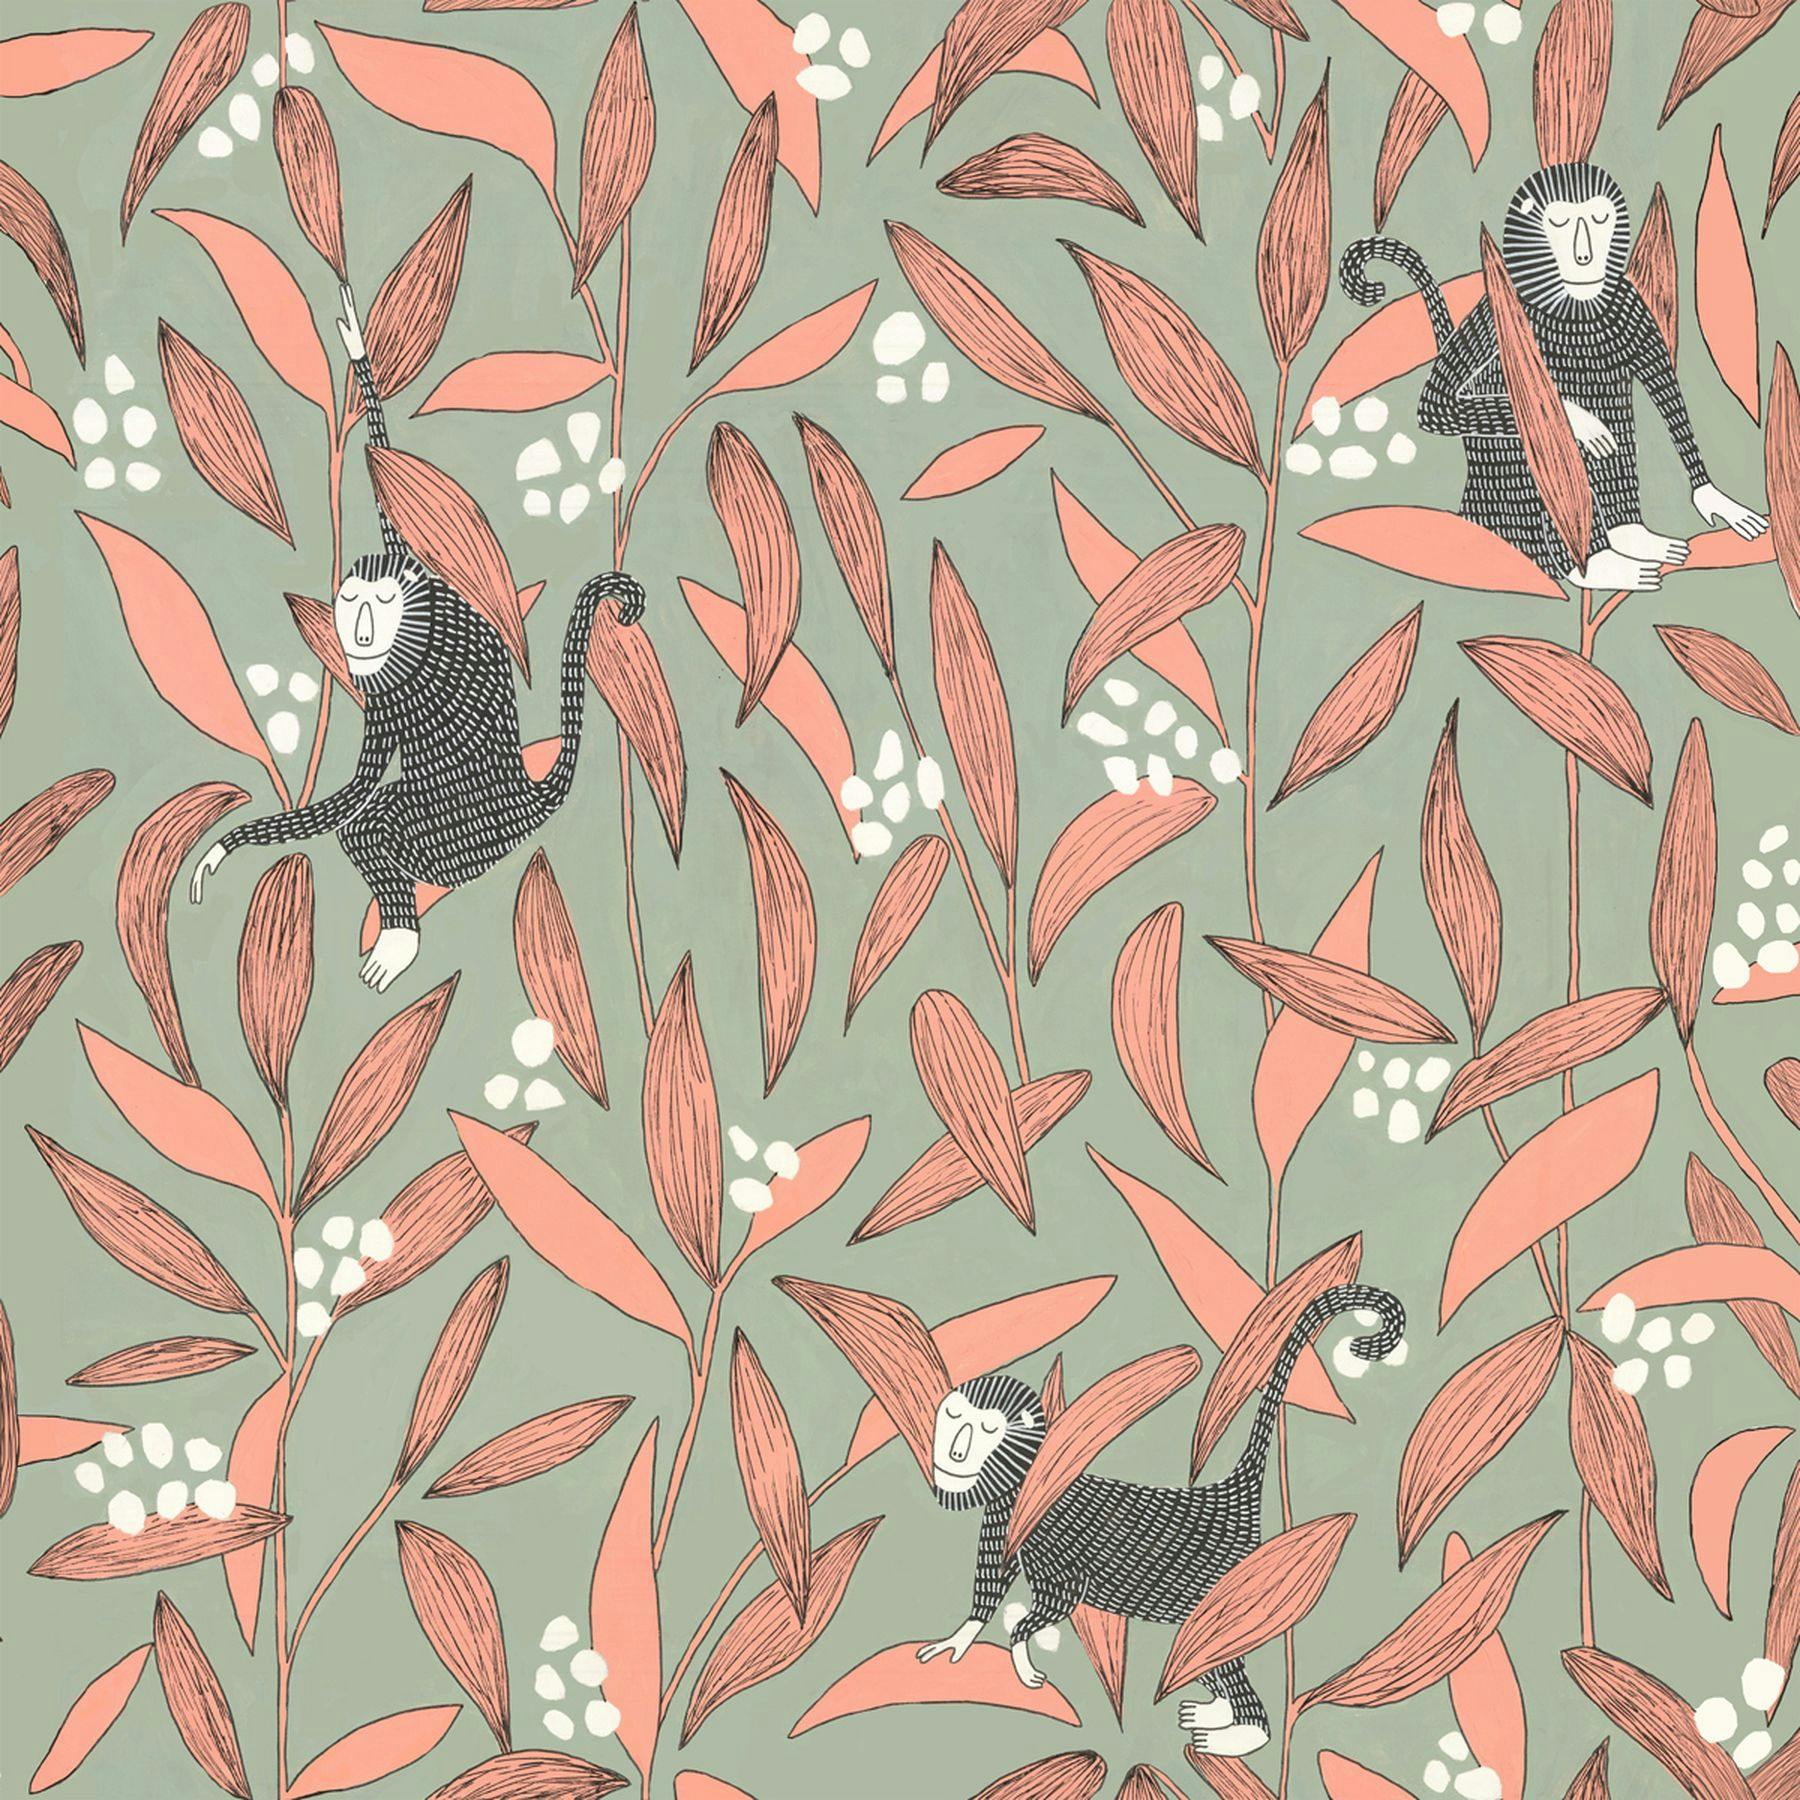 A digital illustration of pink leaves in a vertical pattern with white blossoms dotted around on a sage green background There are three monkeys placed in different positions around the leaves.